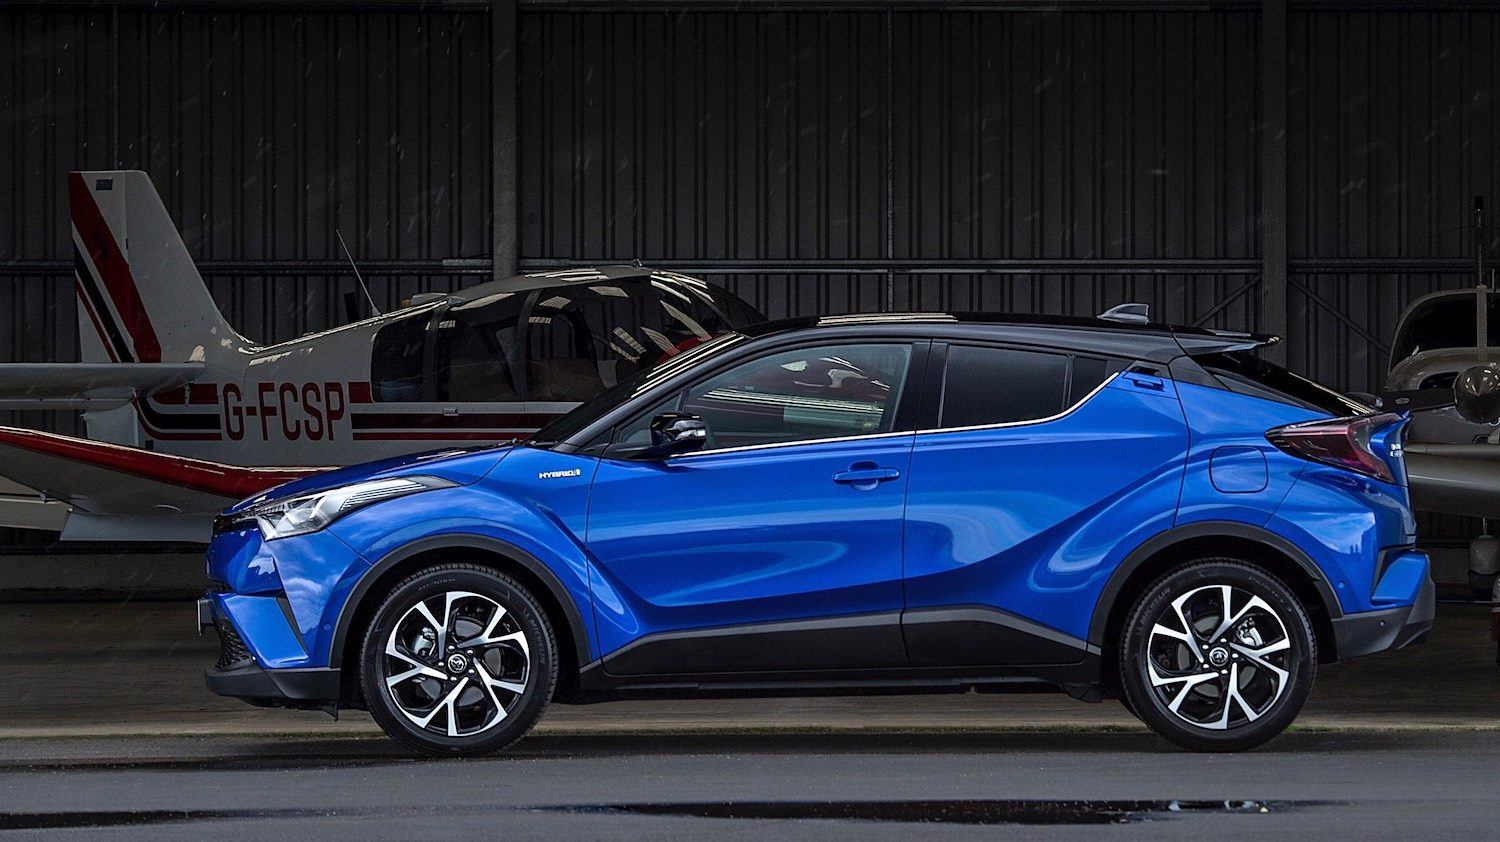 Drive.co.uk On the road in the Toyota CHR Hybrid SUV